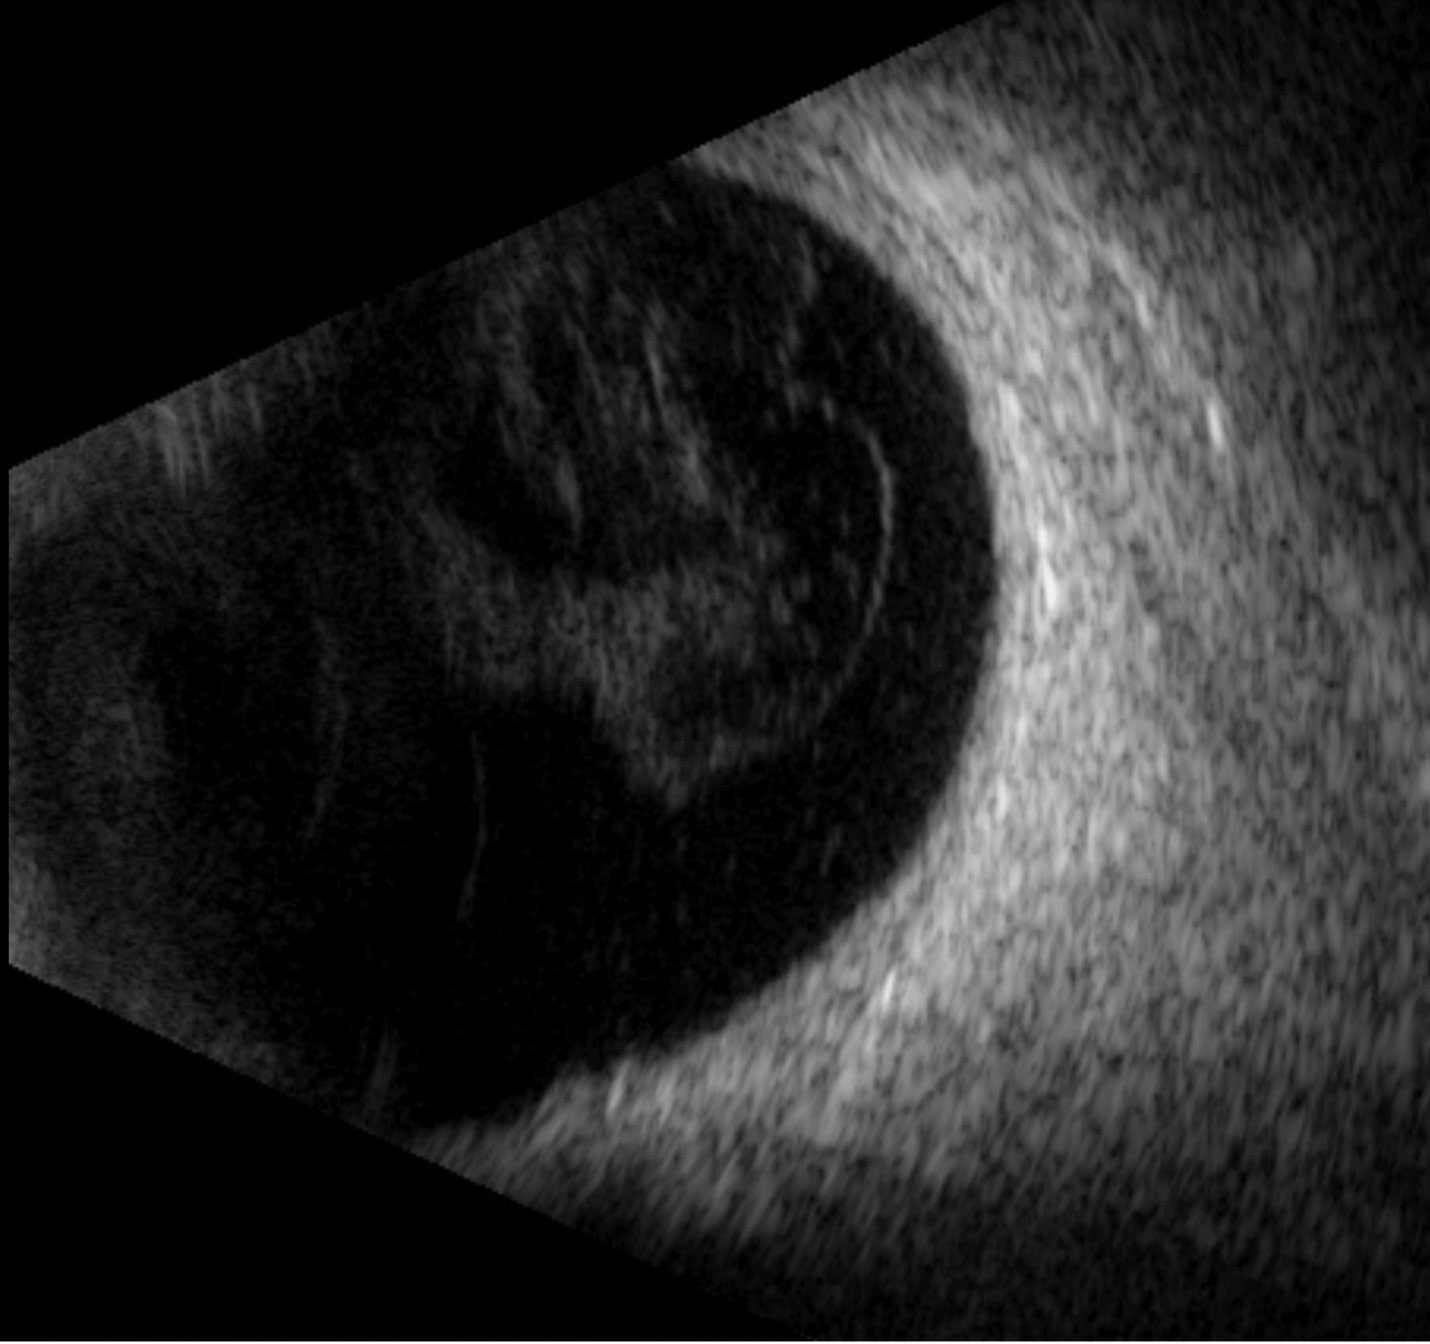 Fig. 3. A normal posterior segment exam with mild vitreous opacities but no retinal detachment or lesion.